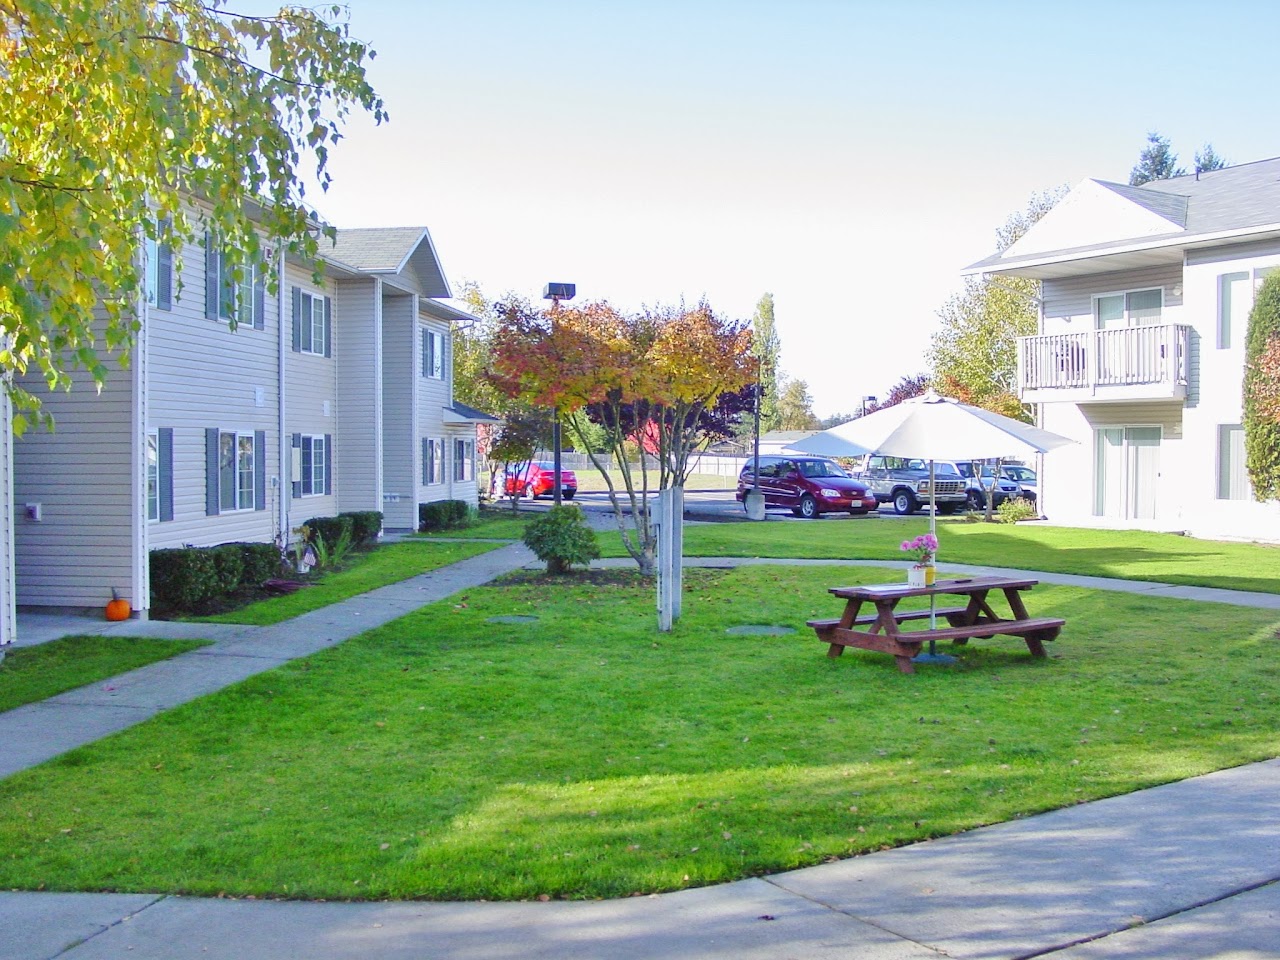 Photo of PRAIRIE RUN APARTMENTS. Affordable housing located at 205 MOUNTAIN VIEW ROAD YELM, WA 98597